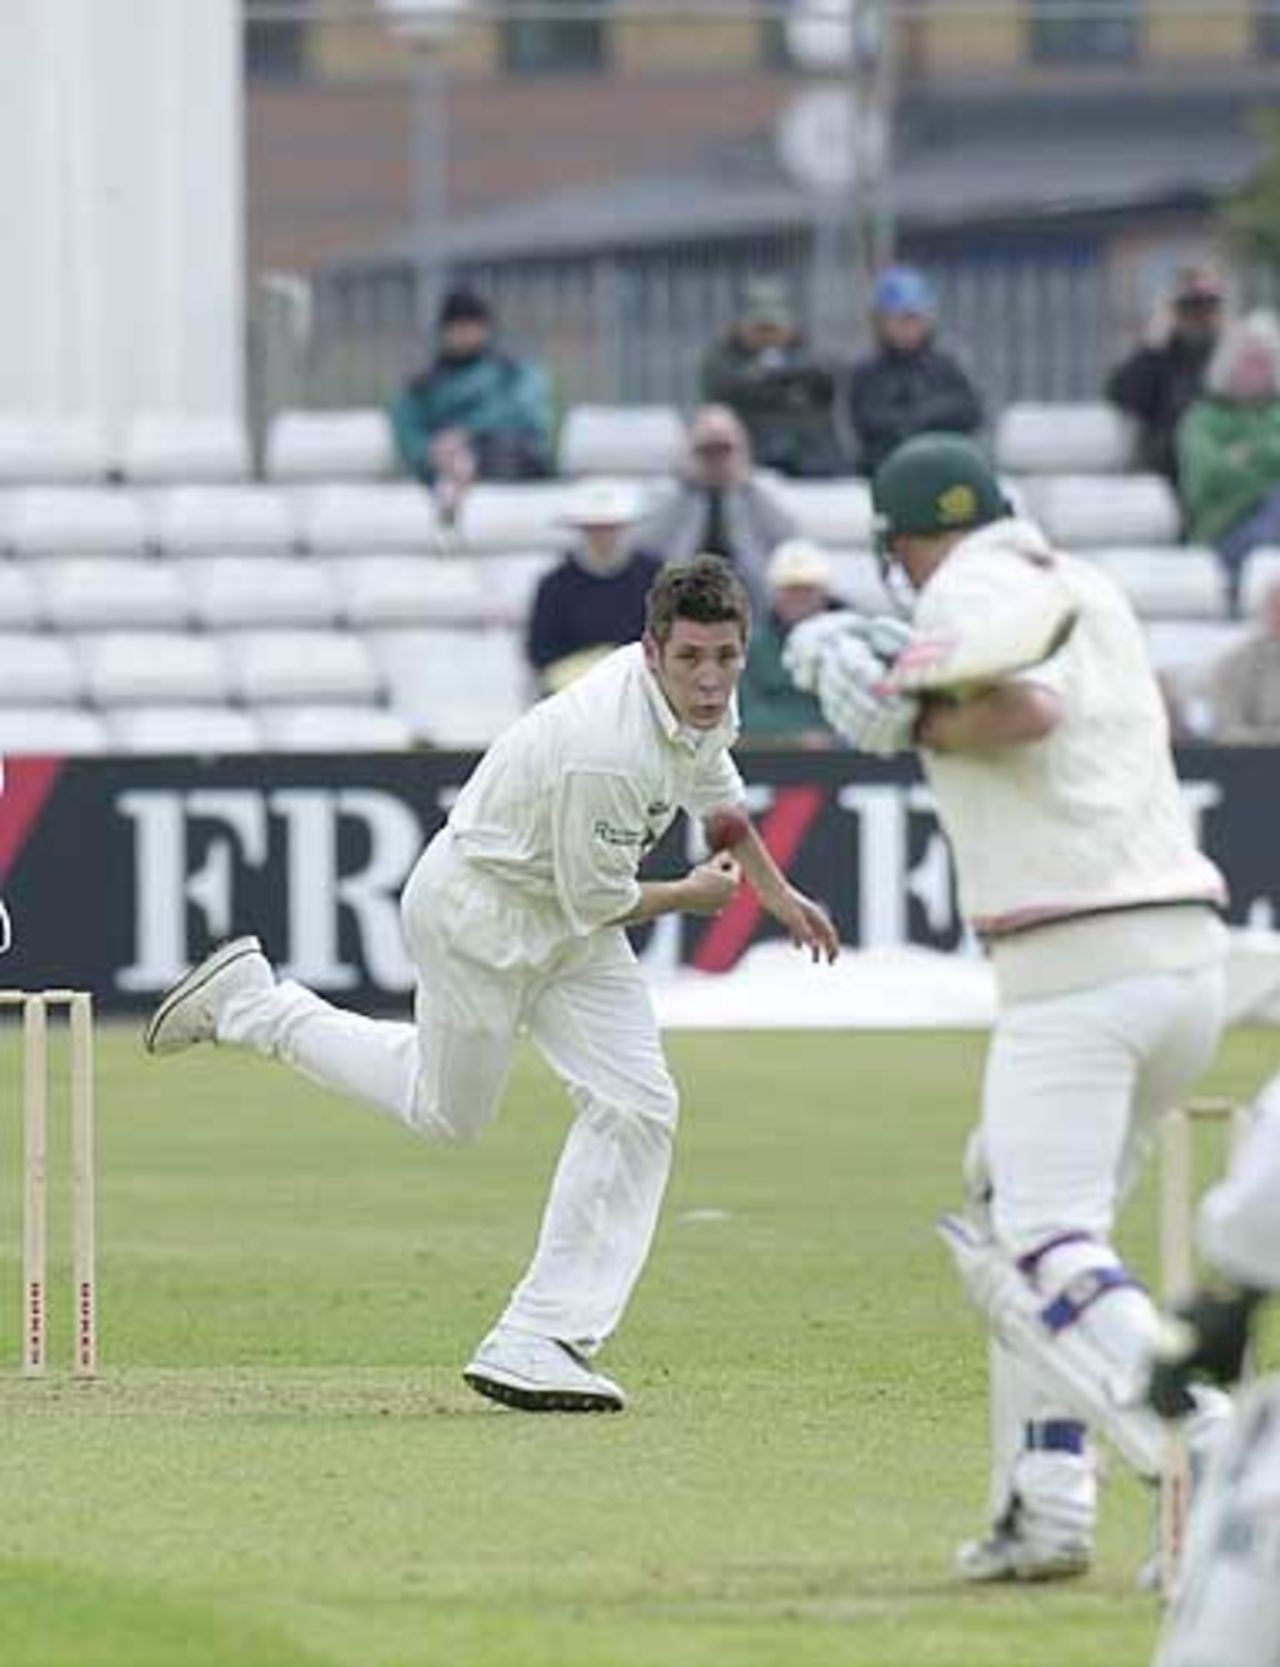 Derby's Tom Lungley sends a delivery past the bat of Sutcliffe